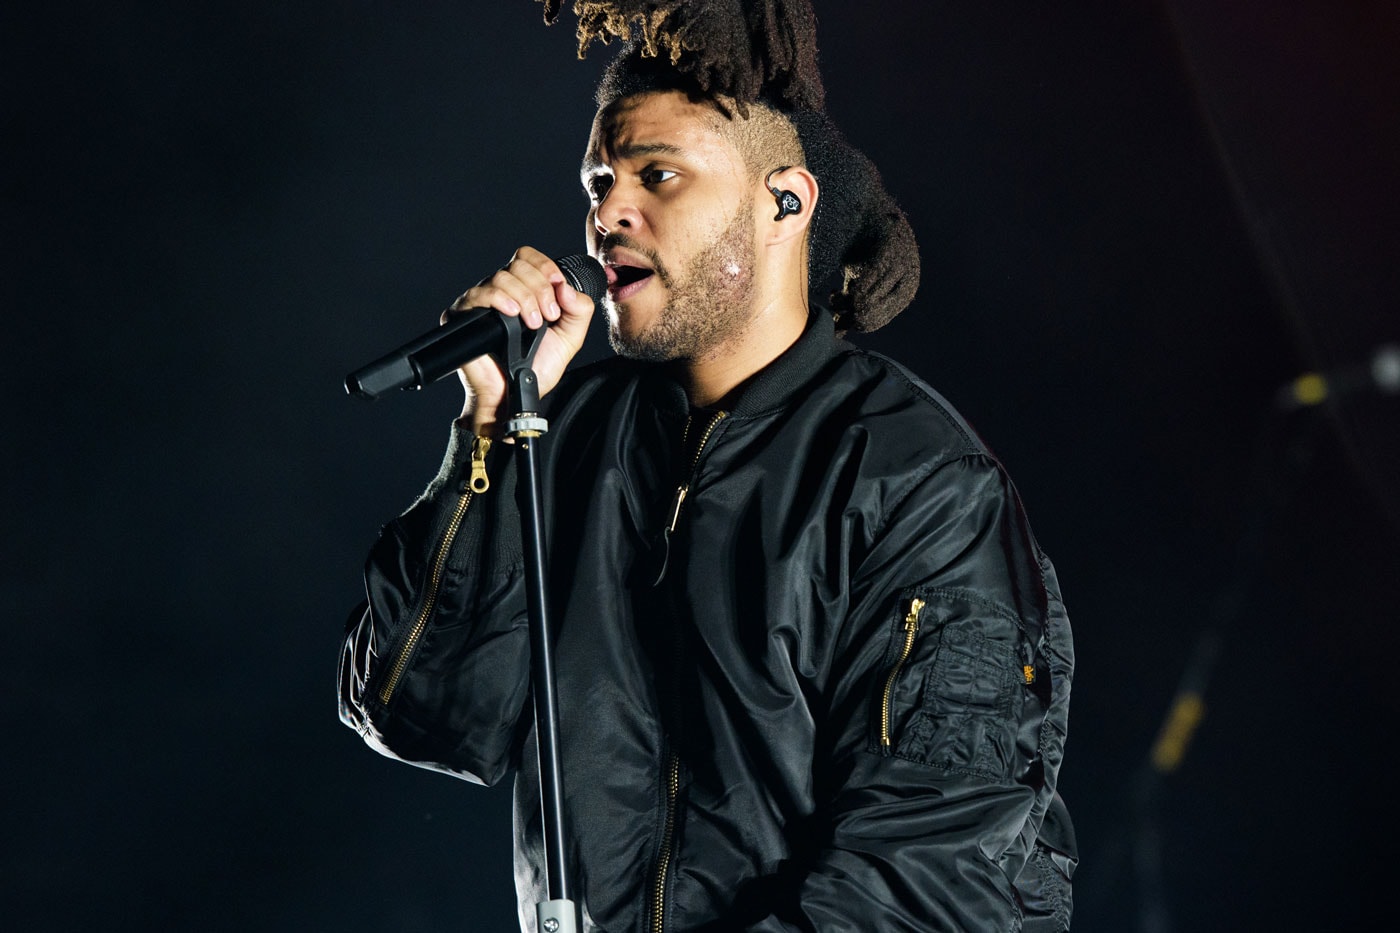 The Weeknd's 'Beauty Behind the Madness' Becomes His First Number One Album